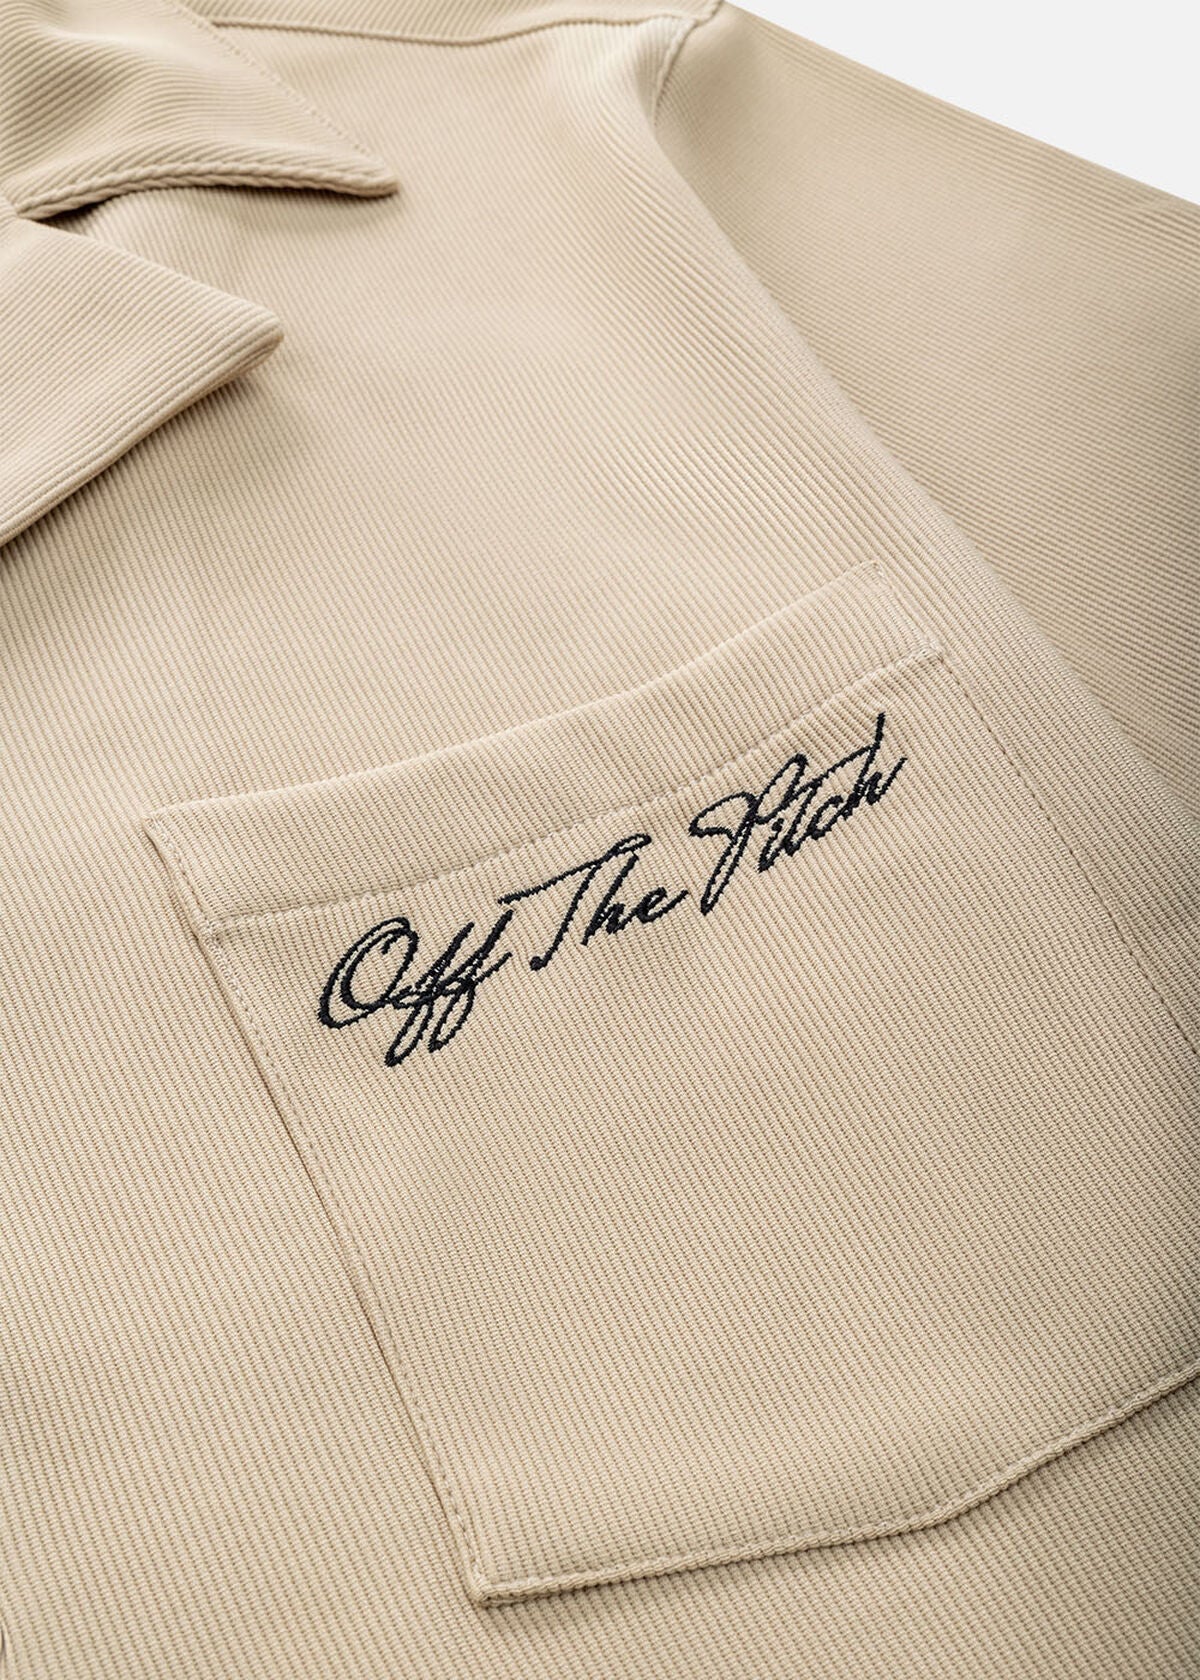 OFF THE PITCH DOUBLE SCRIPT SHIRT